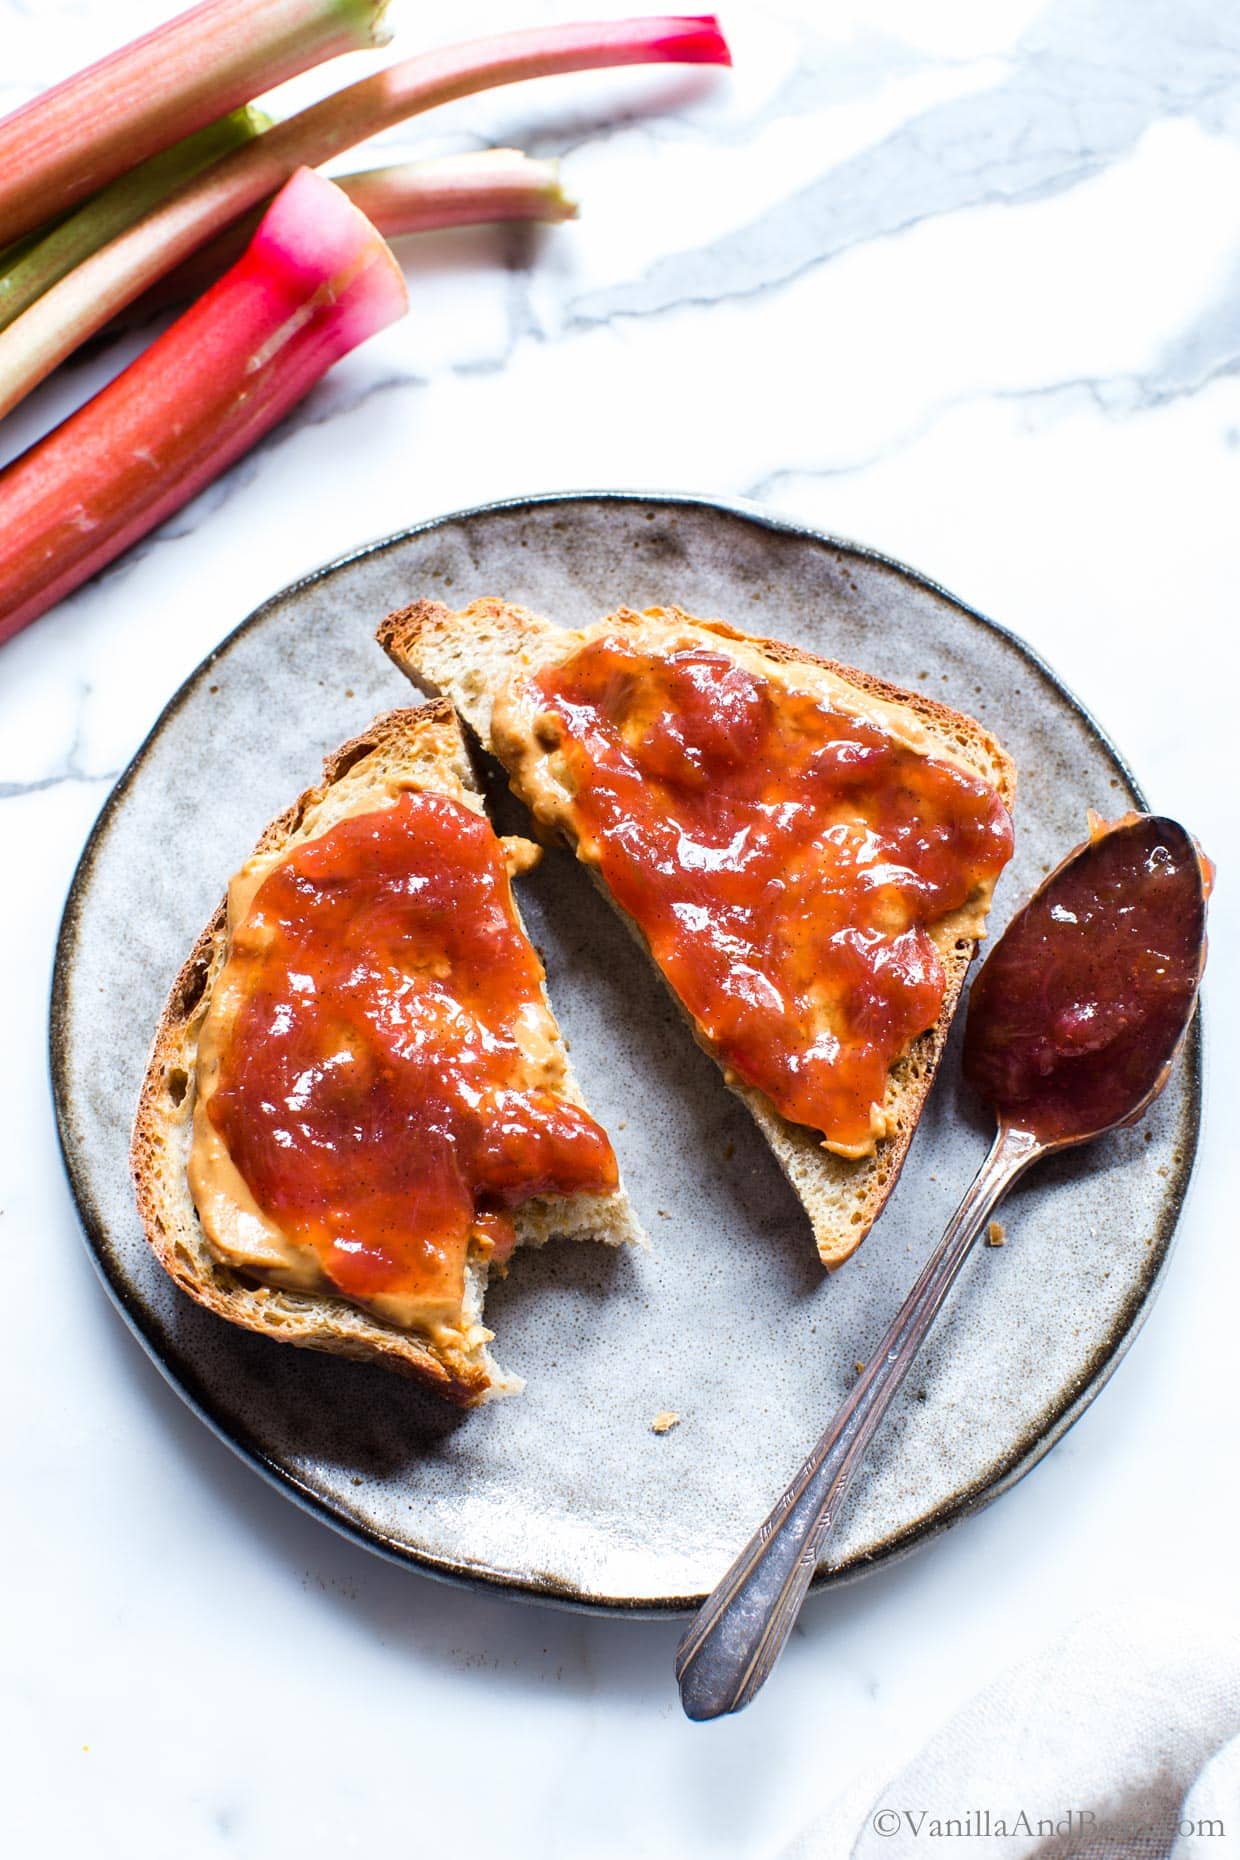 Peanut butter and rhubarb jam on toast, on a plate with a jam filled spon.